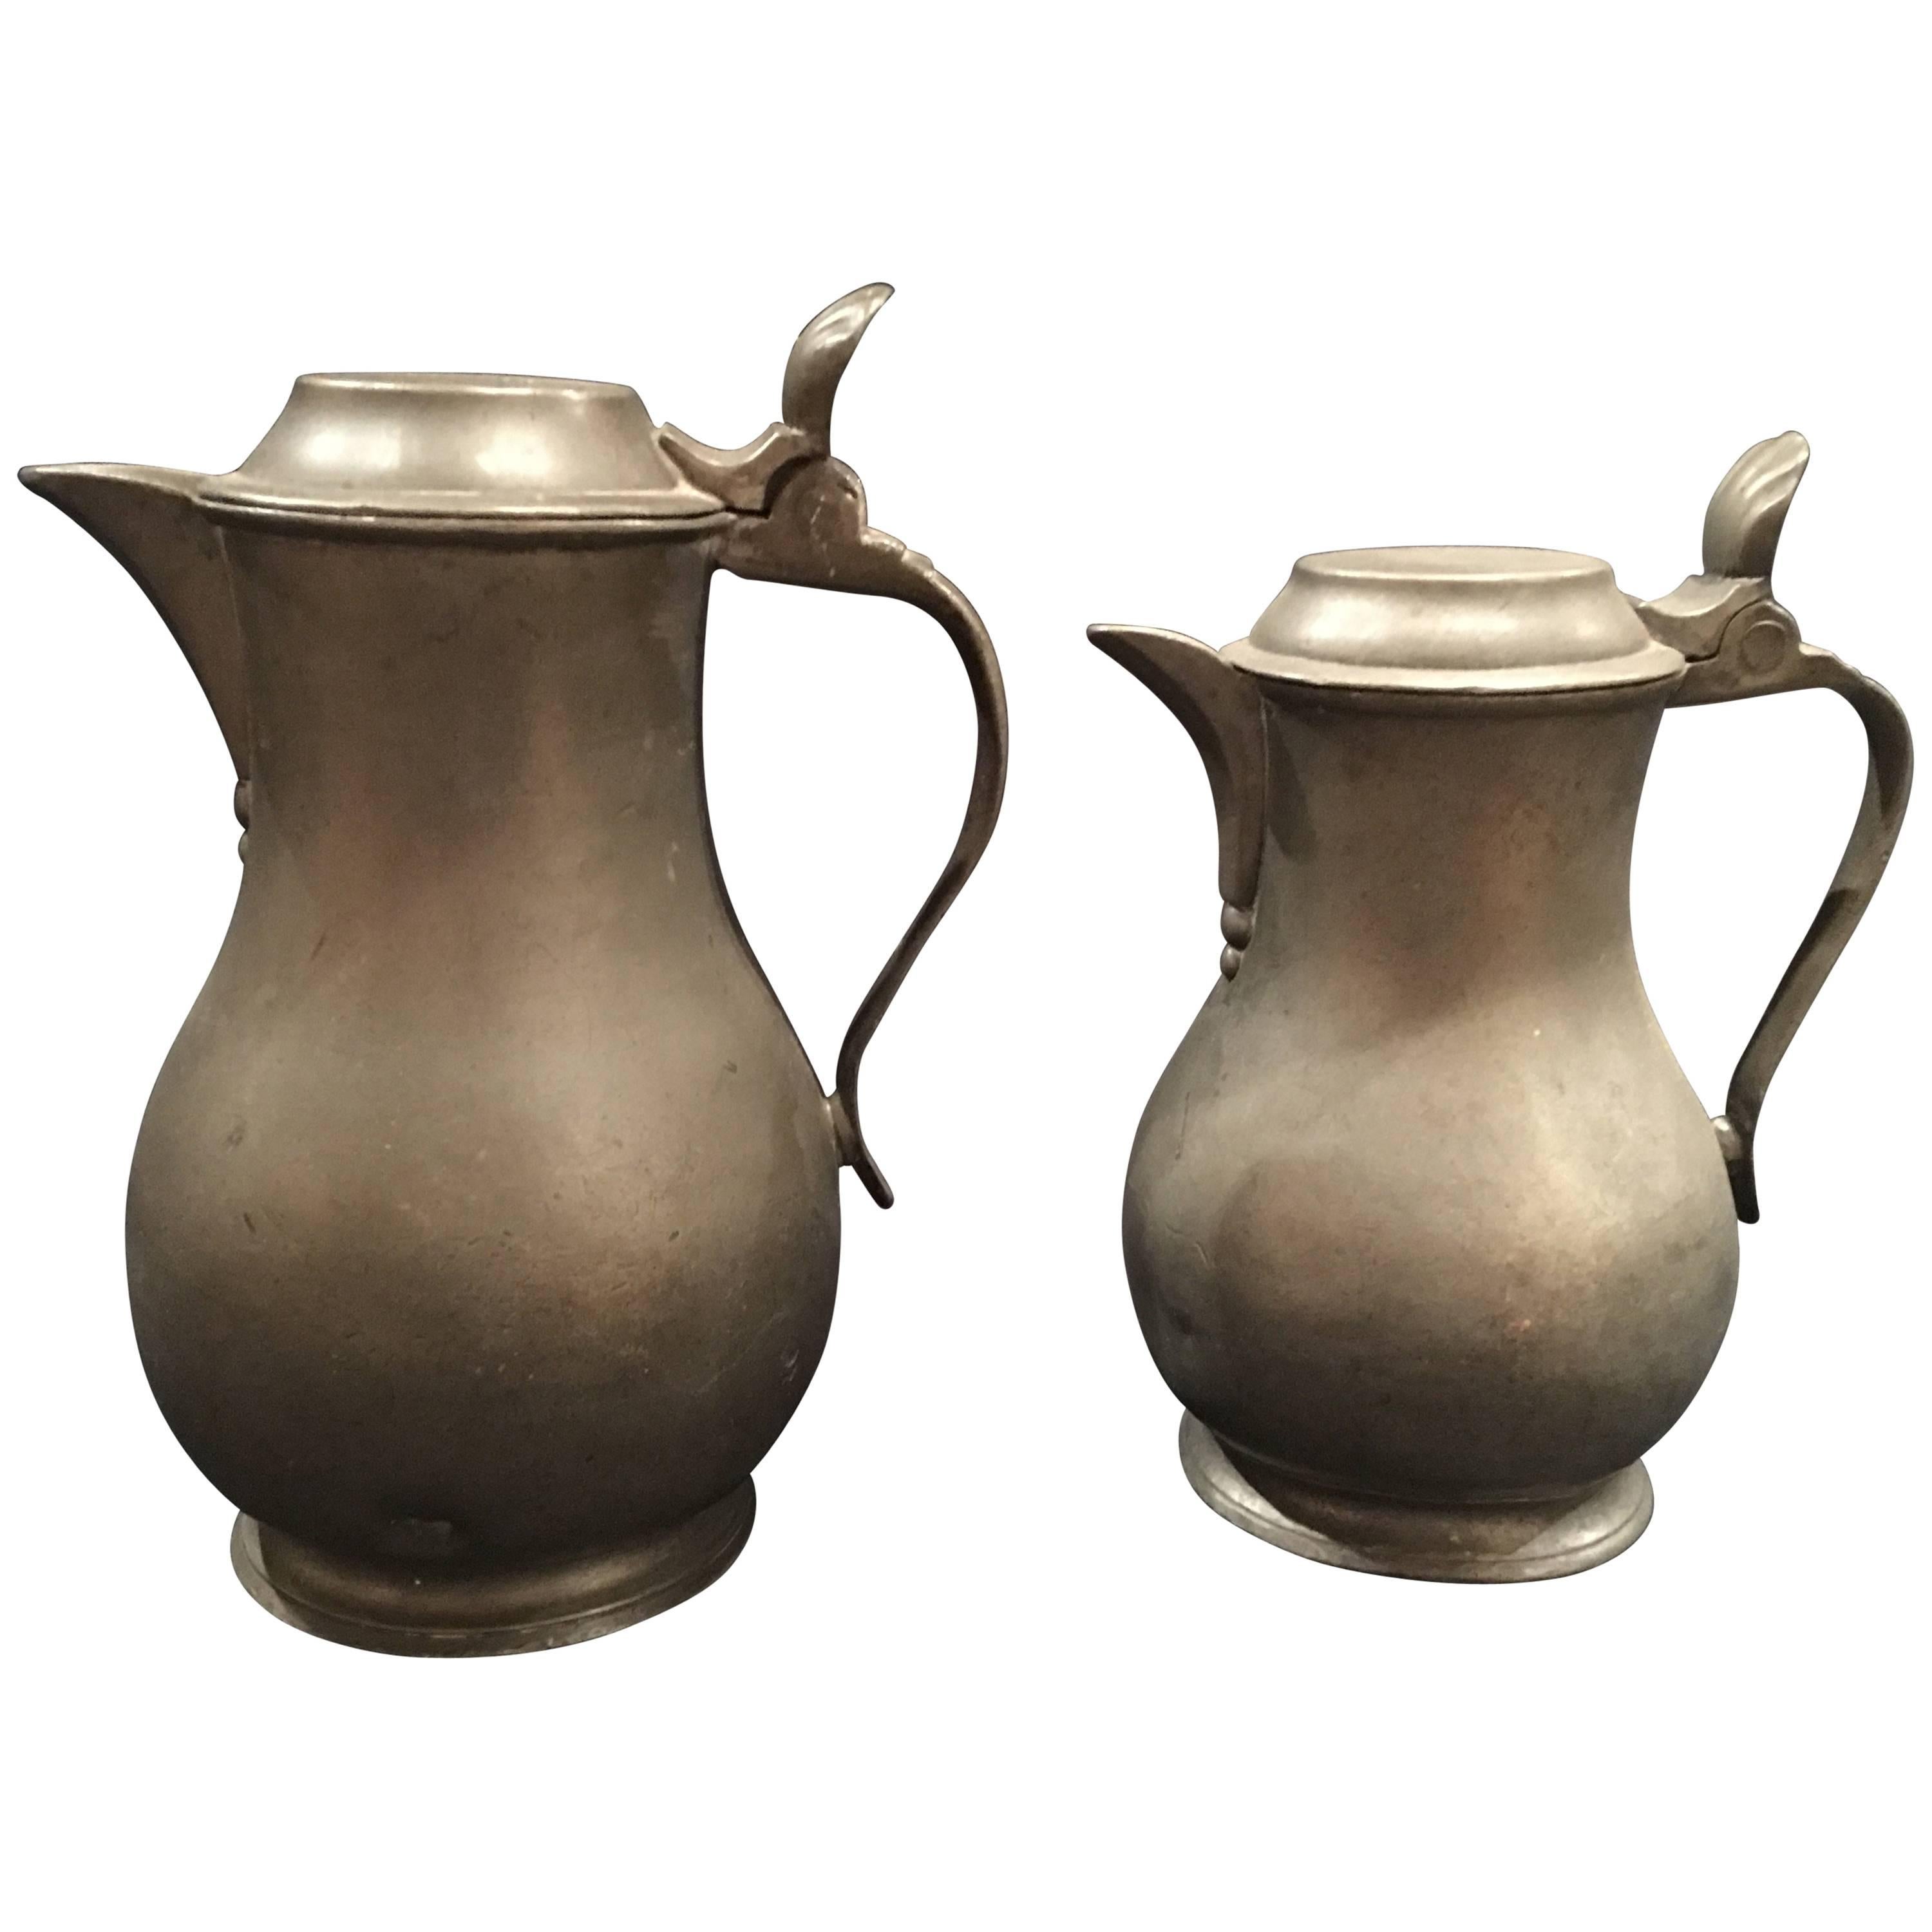 English Pair of Lidded Pewter Jugs or Tankards with Handles, 19th Century